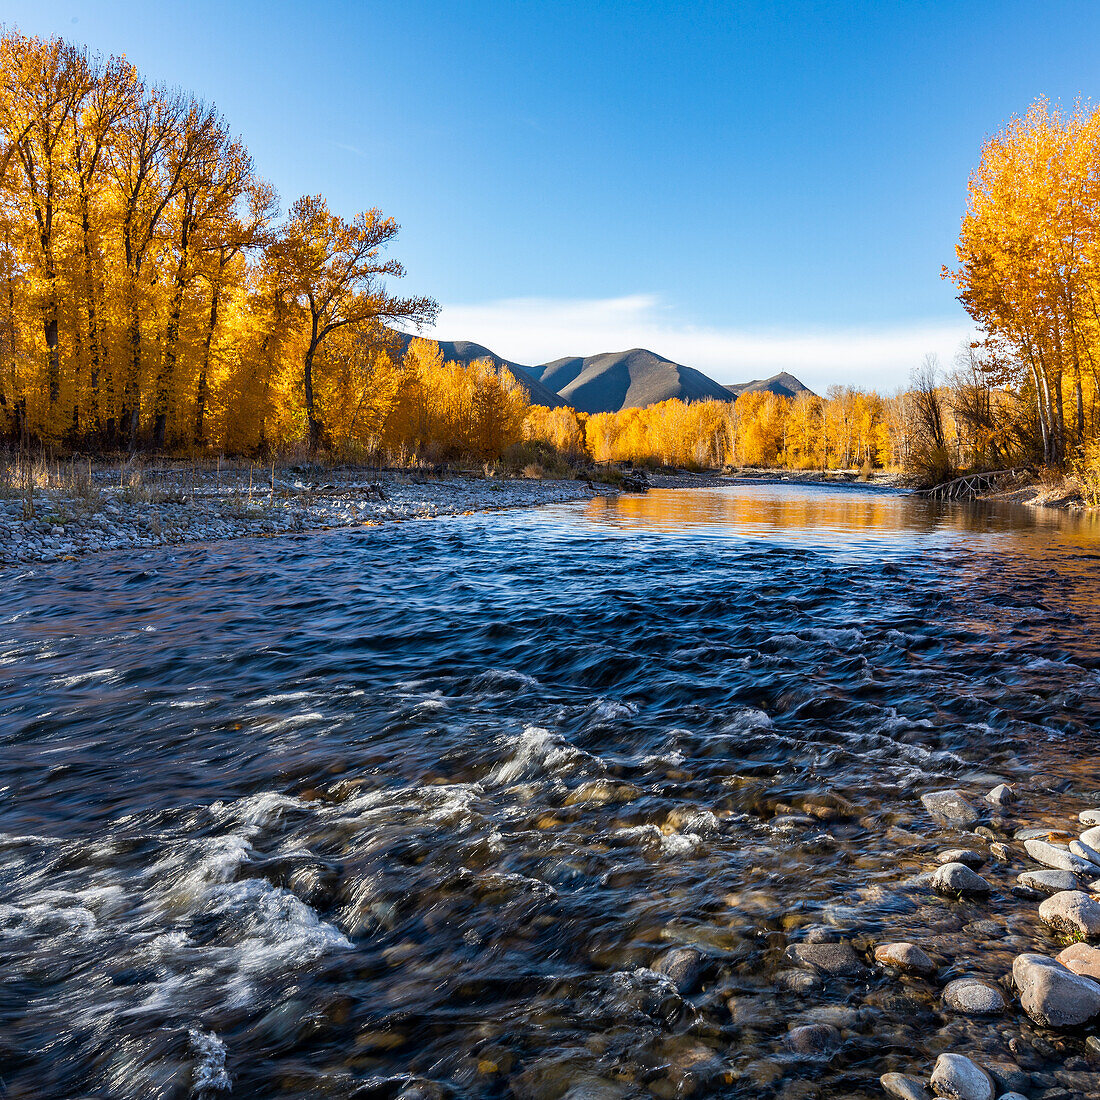 USA, Idaho, Bellevue, Big Wood River and yellow trees in Autumn